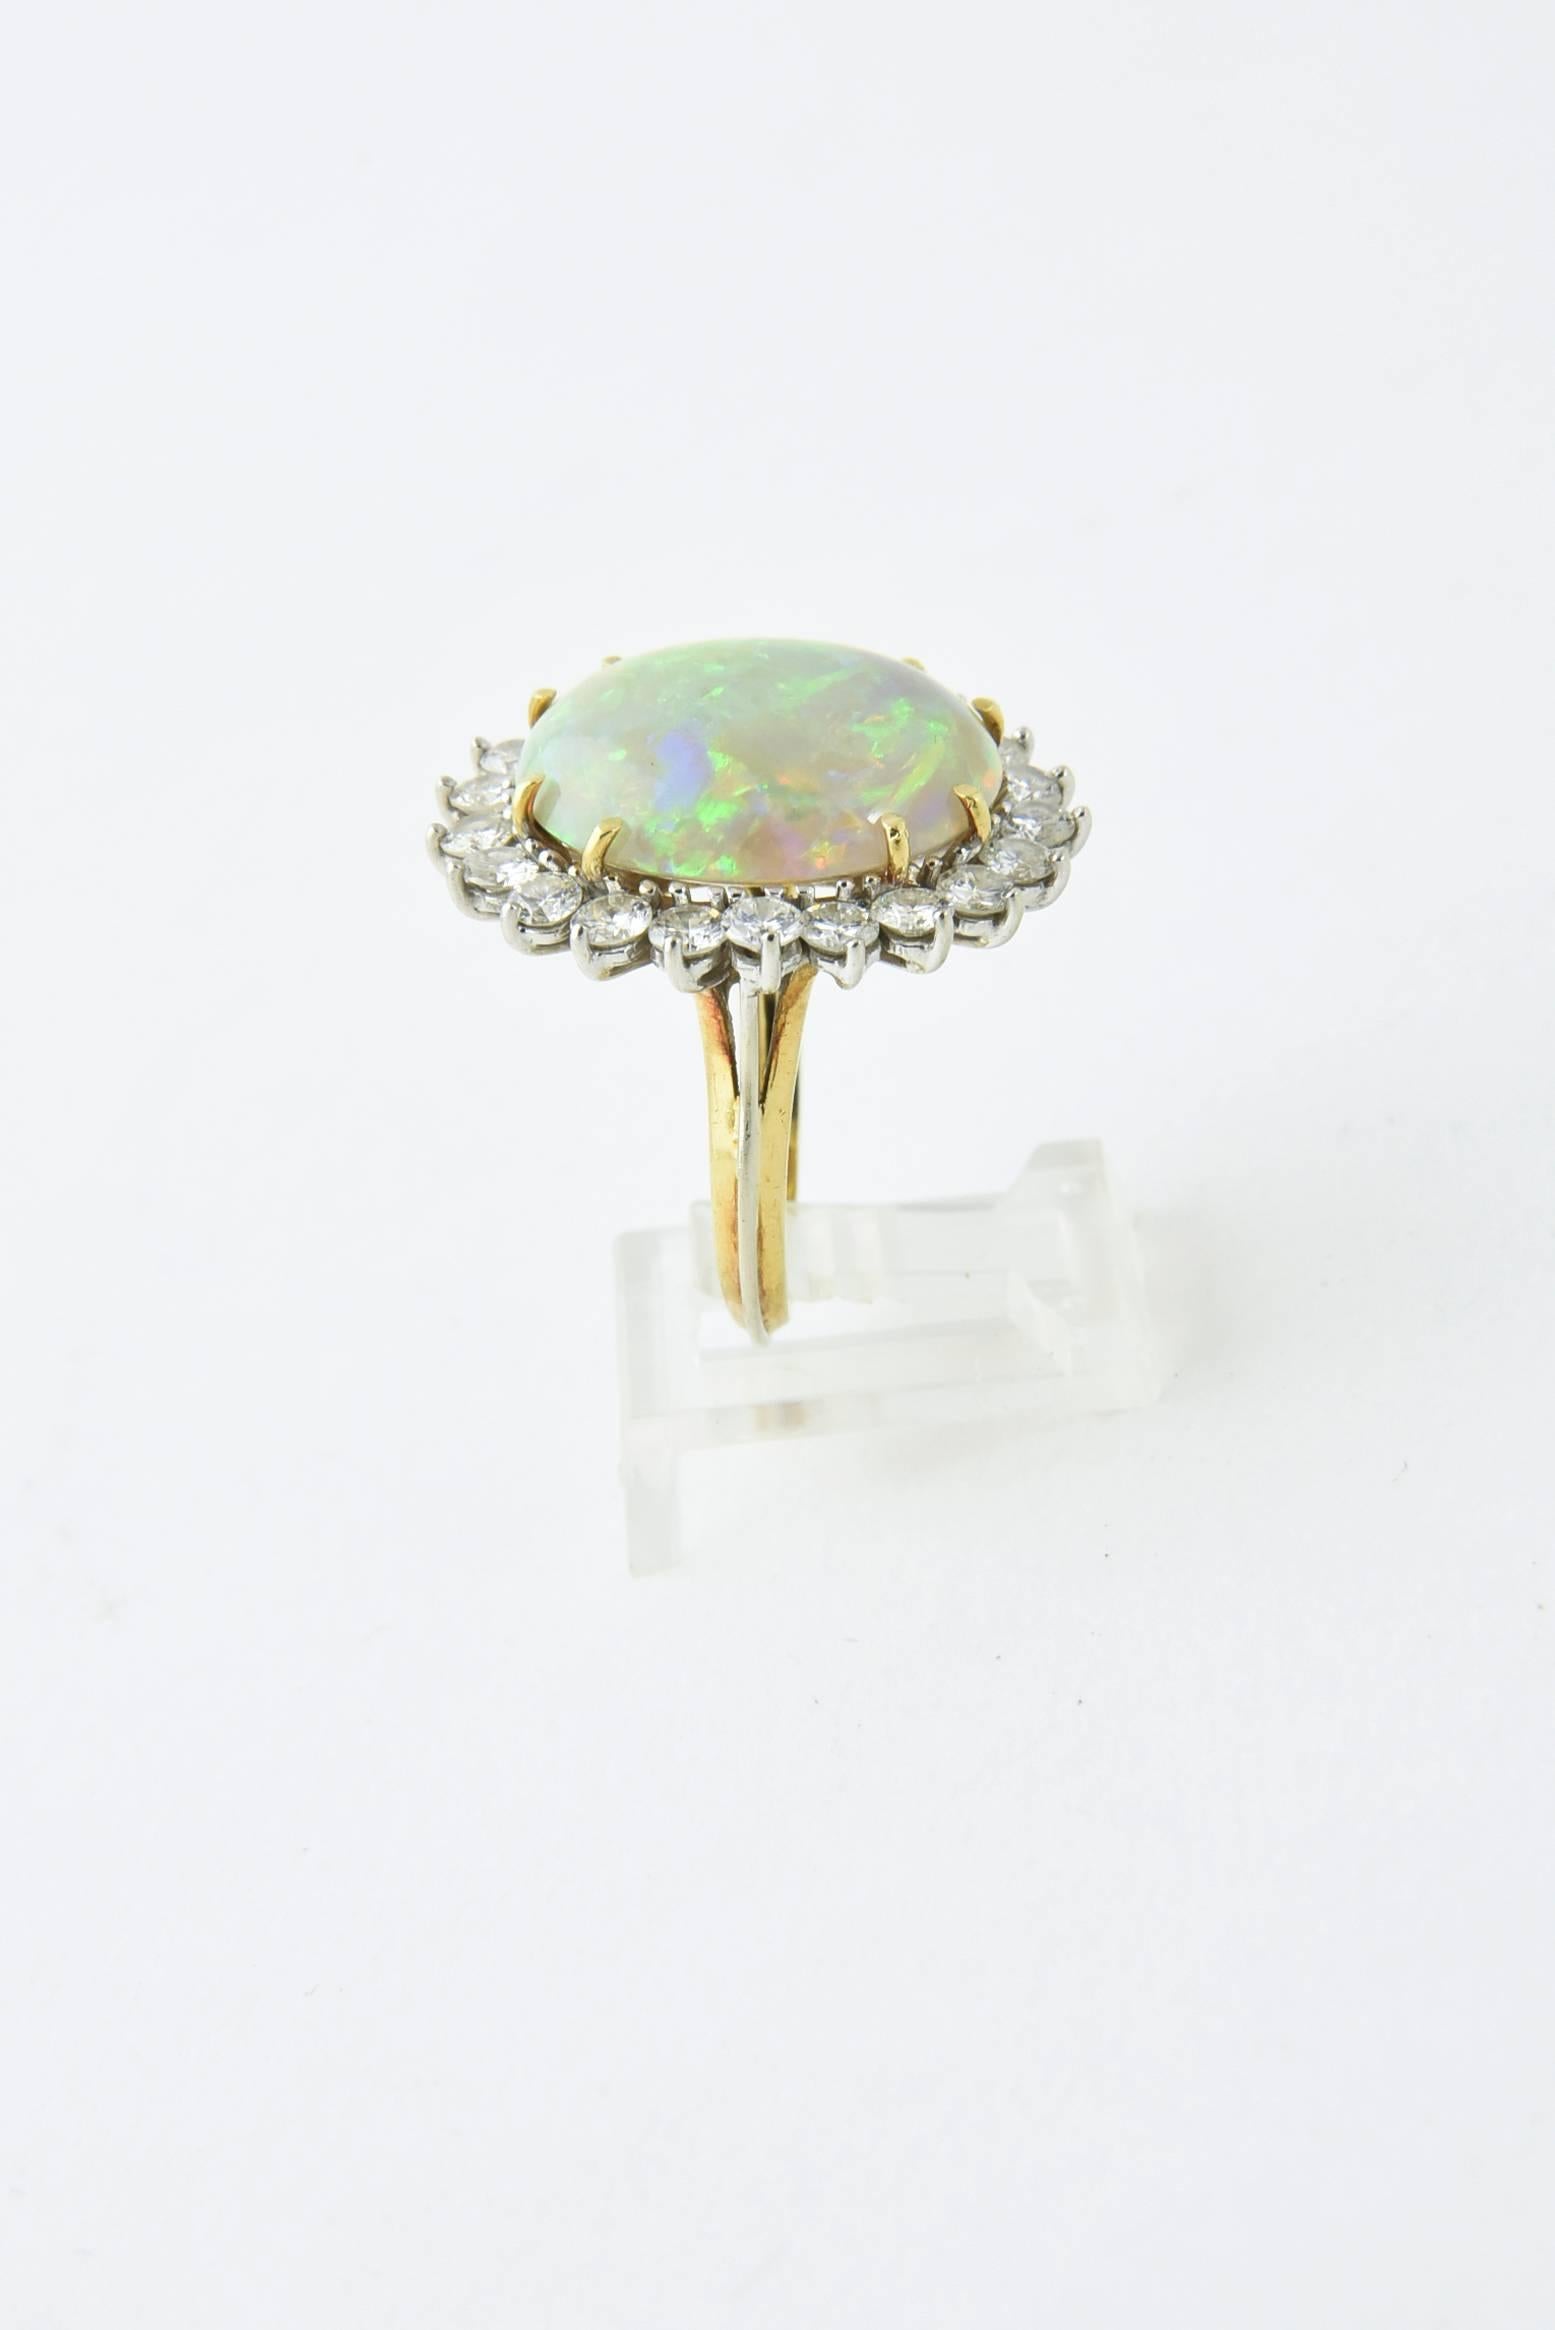 Semi-black Crystal Opal with incredible color with a diamond frame mounted in 18k white & yellow gold.  17.5 carat approximate weight of opal and 2.52c approximate total weight of fine quality diamonds.

US Ring size 6